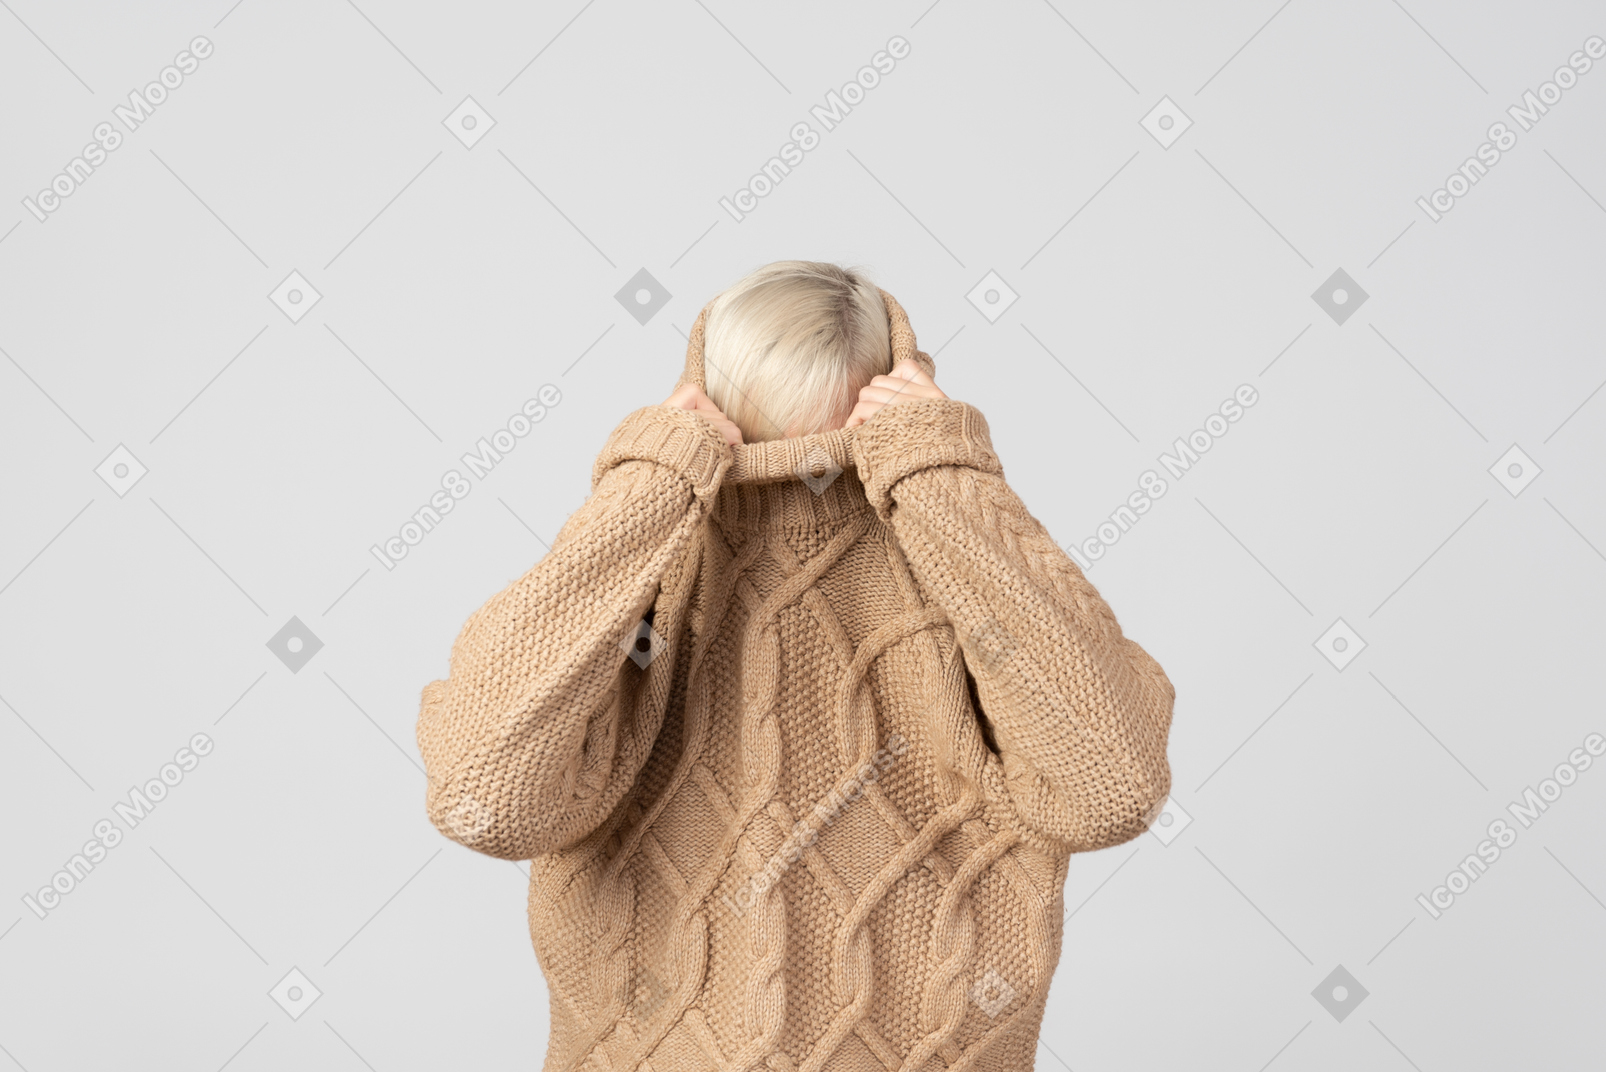 Young woman taking off her sweater